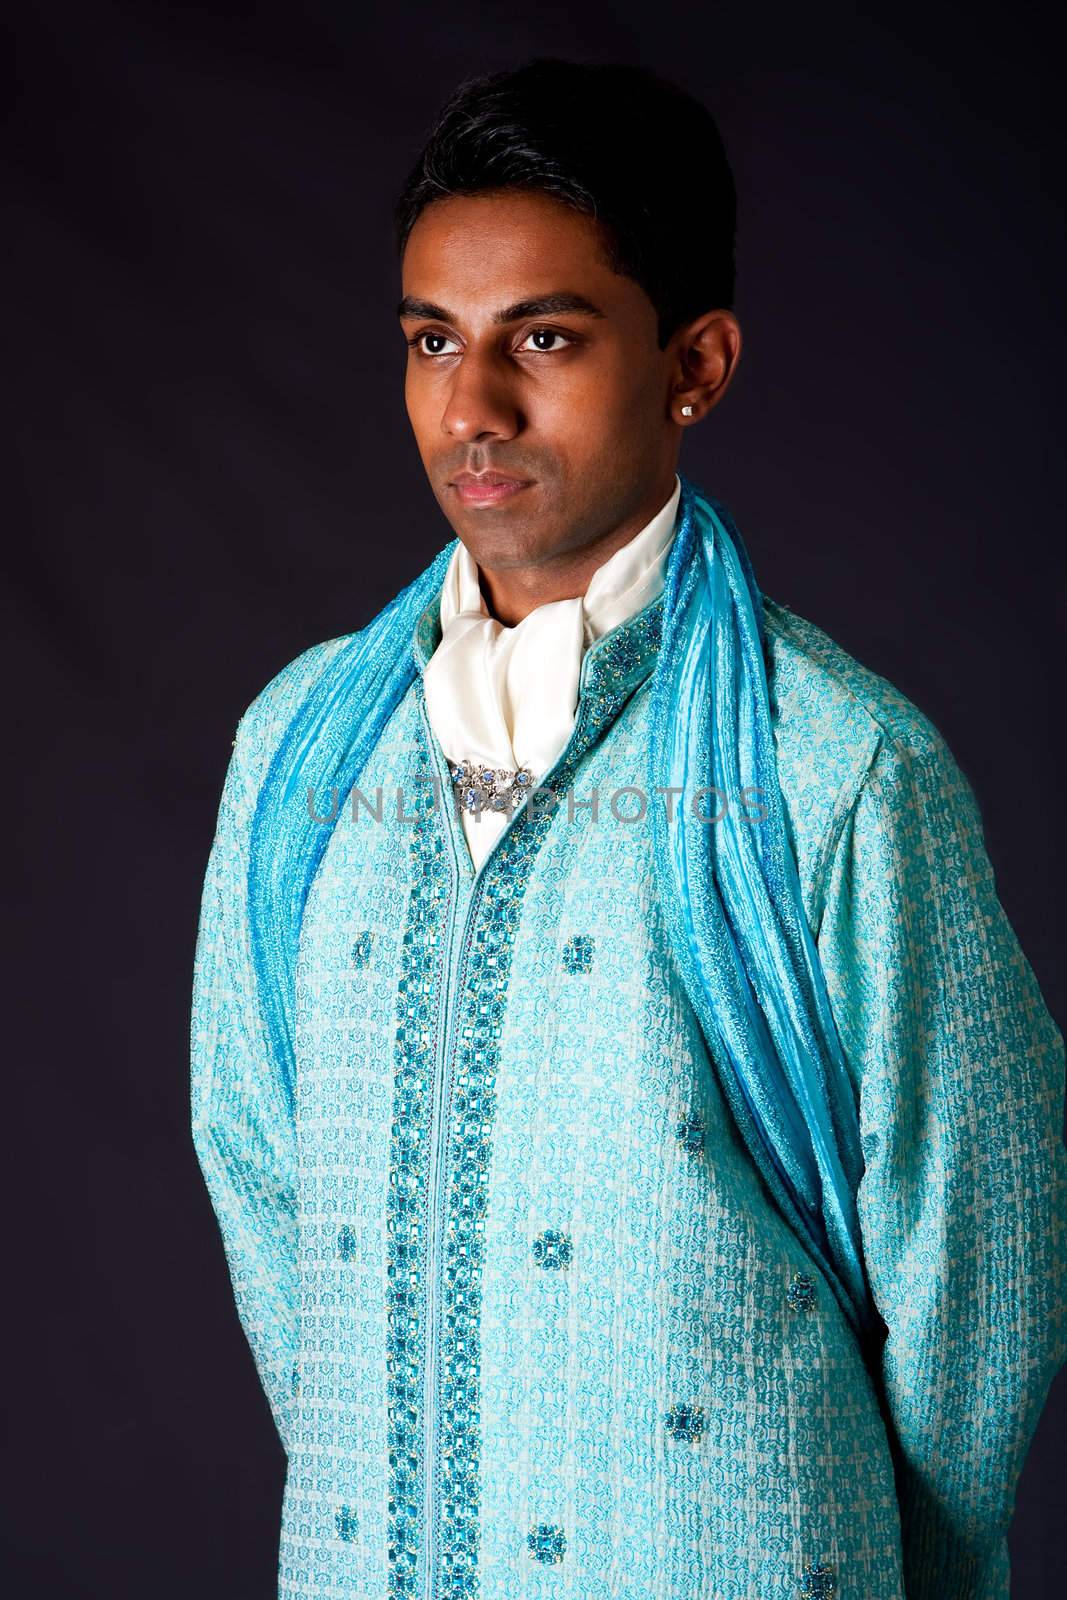 Beautiful authentic Indian hindu man in typical ethnic groom attire. Bangali male wearing a light blue agua decorated Dhoti with shawl.